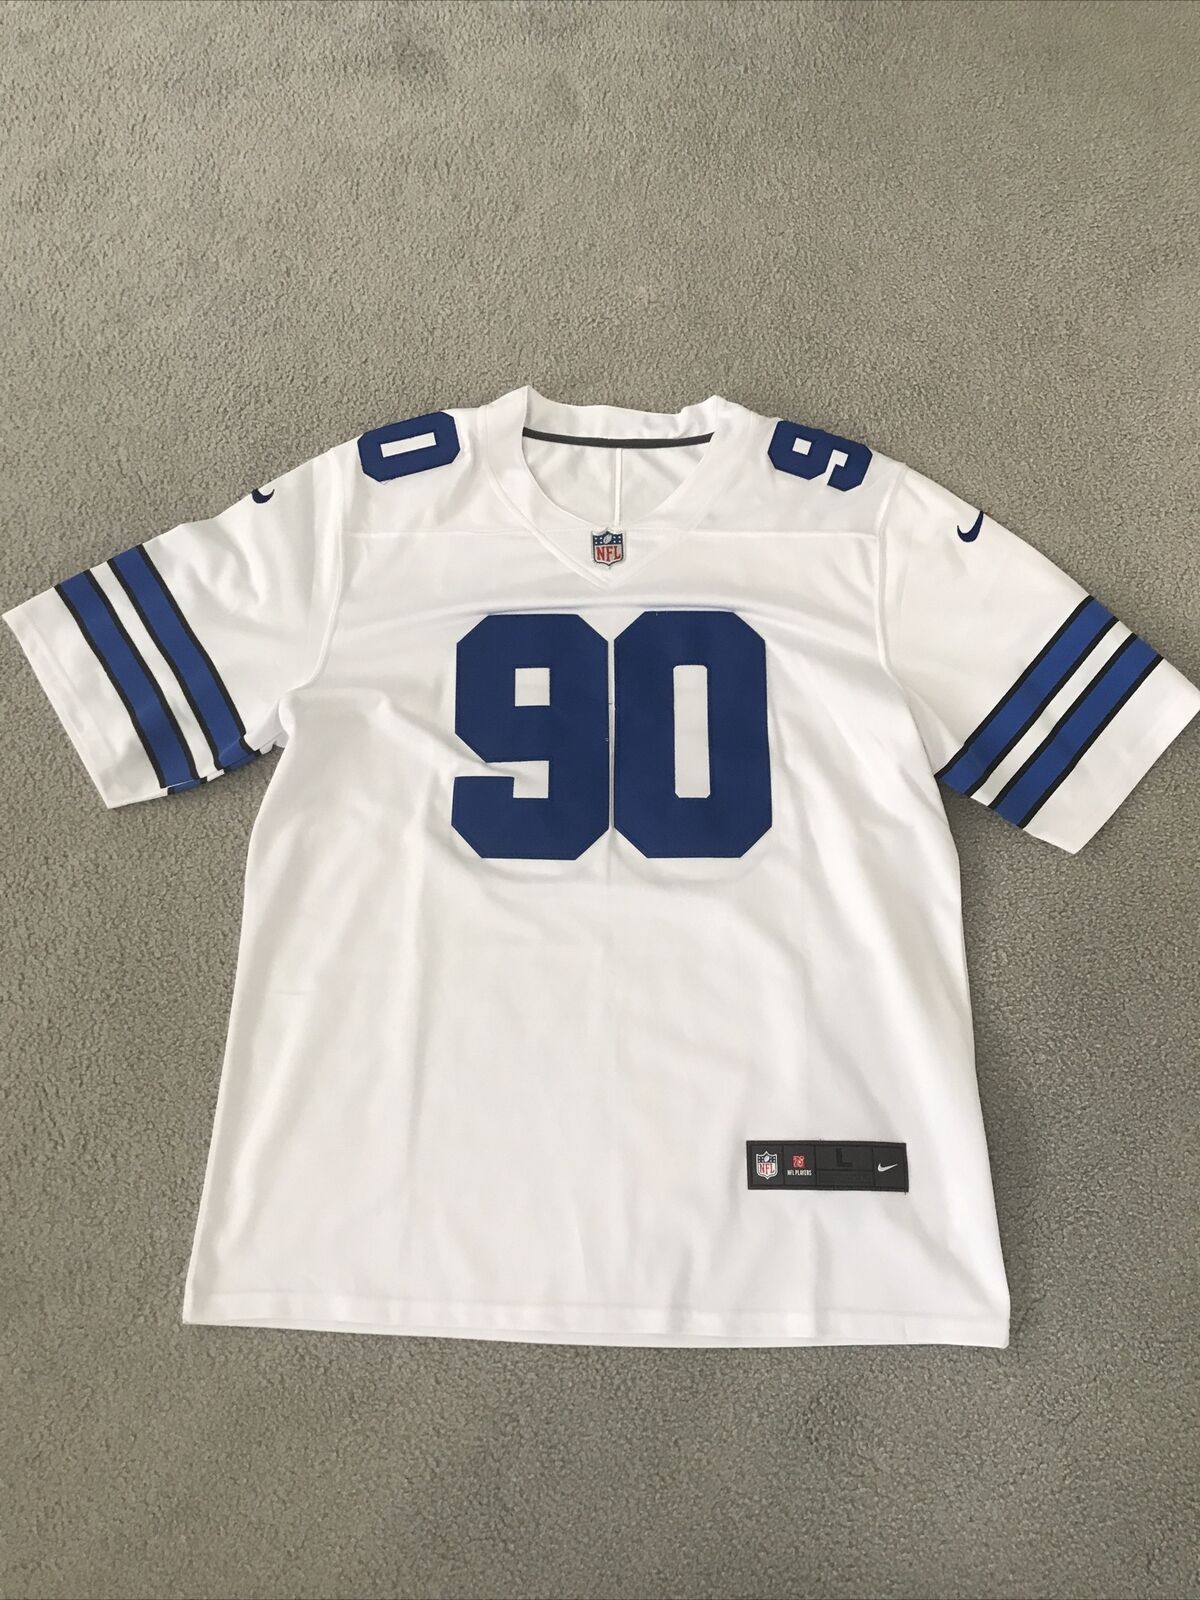 Demarcus Lawrence Large White Stitched Dallas Cowboys Jersey #90